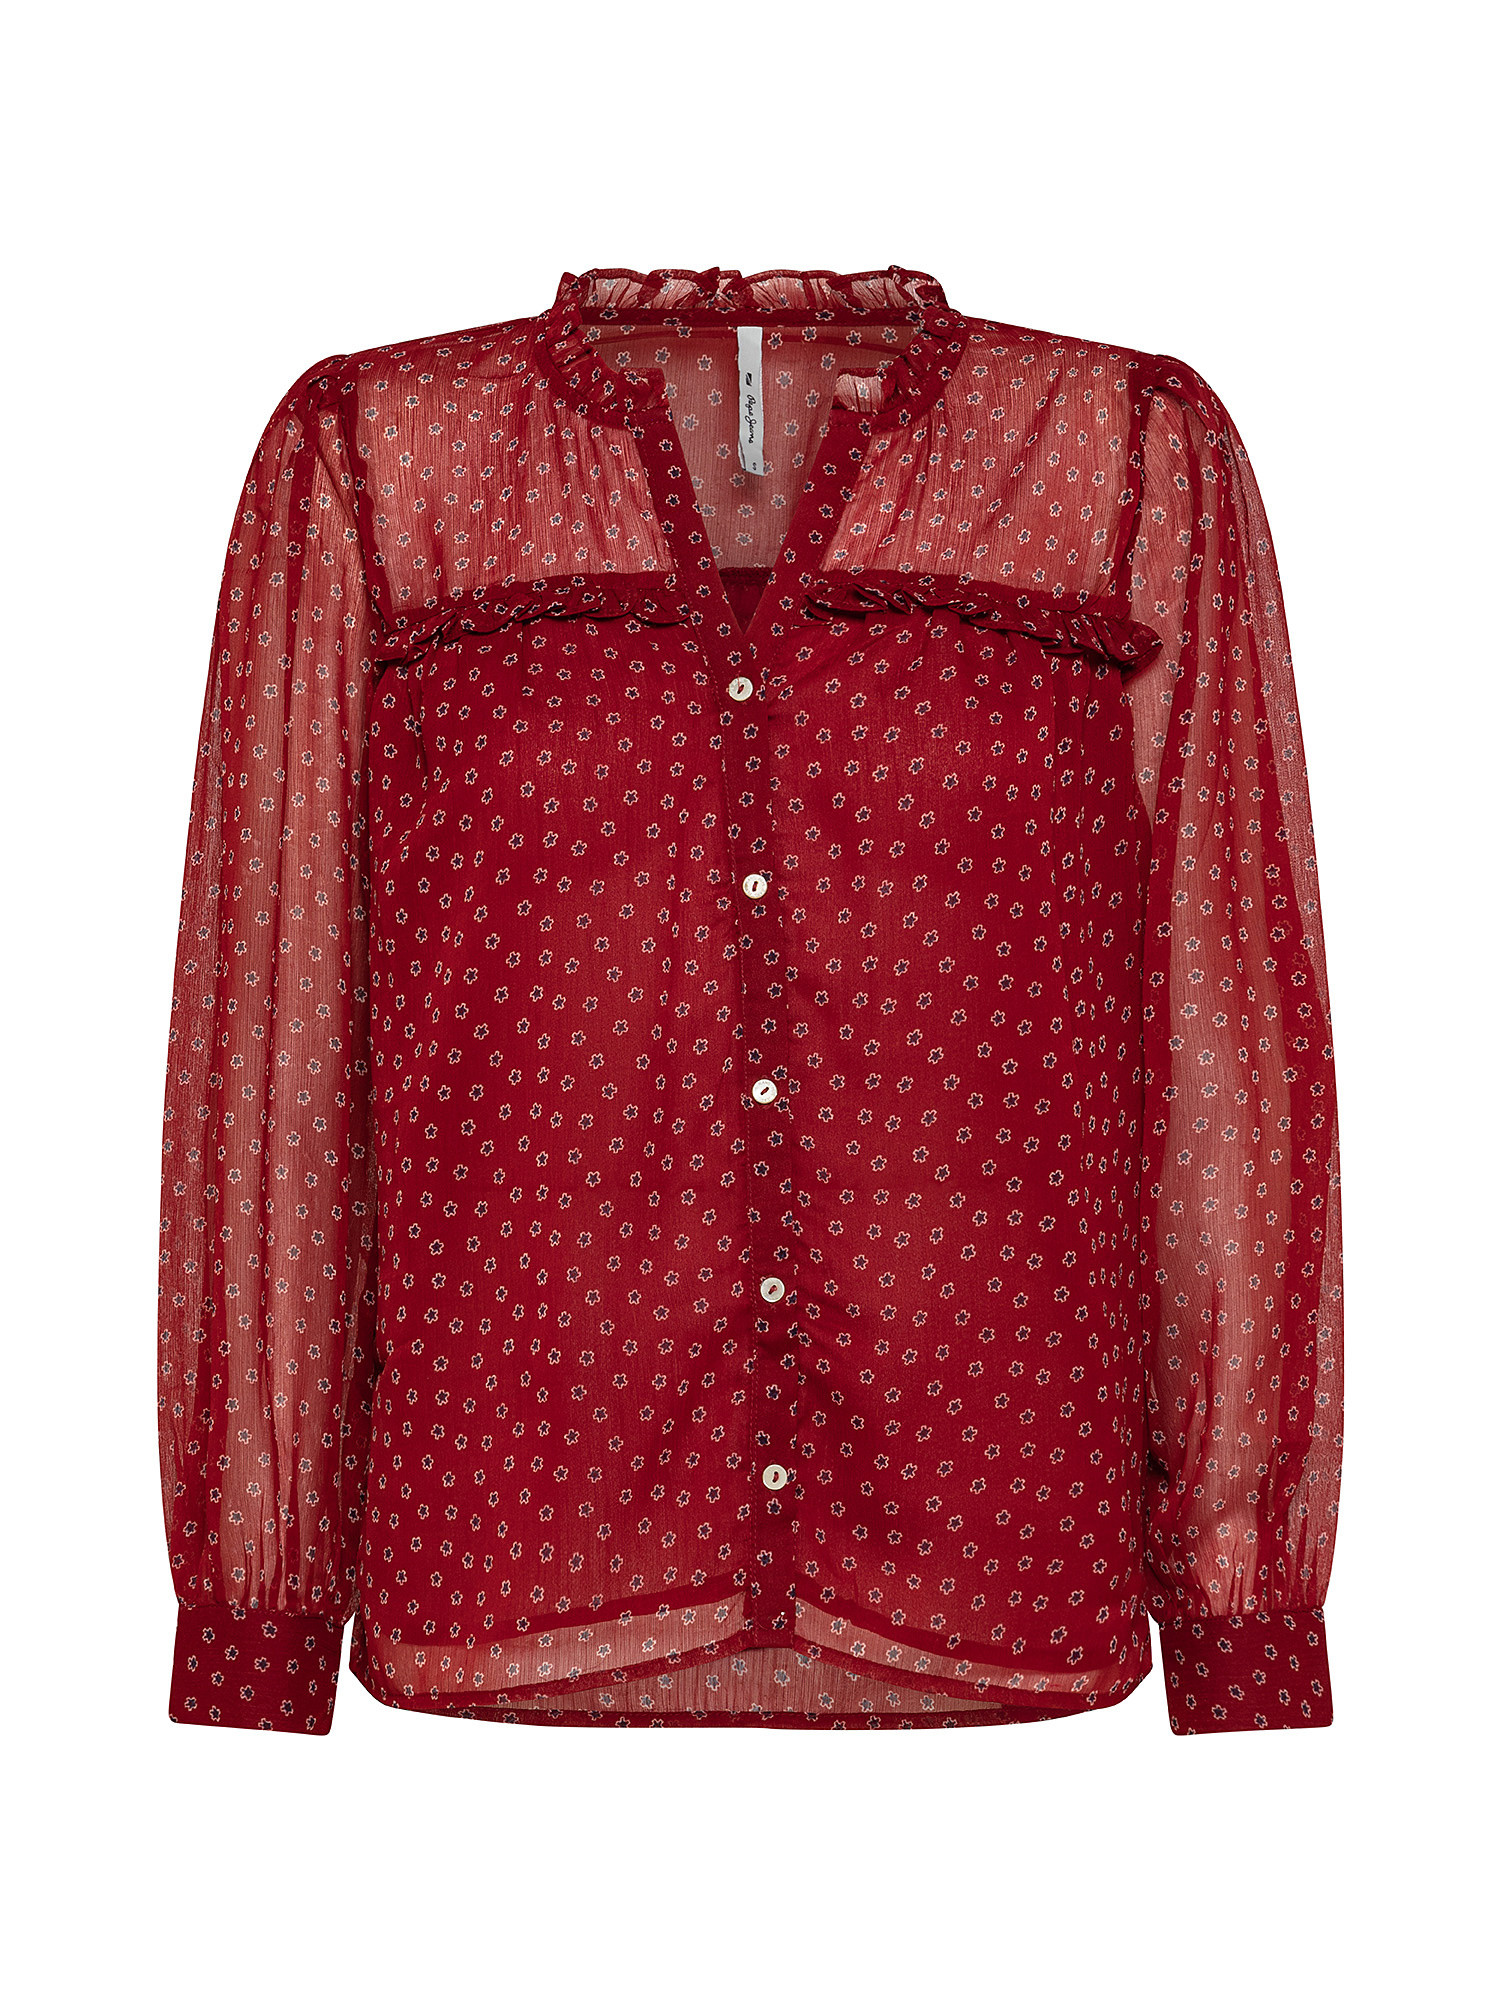 Nala blouse with floral print, Red, large image number 0